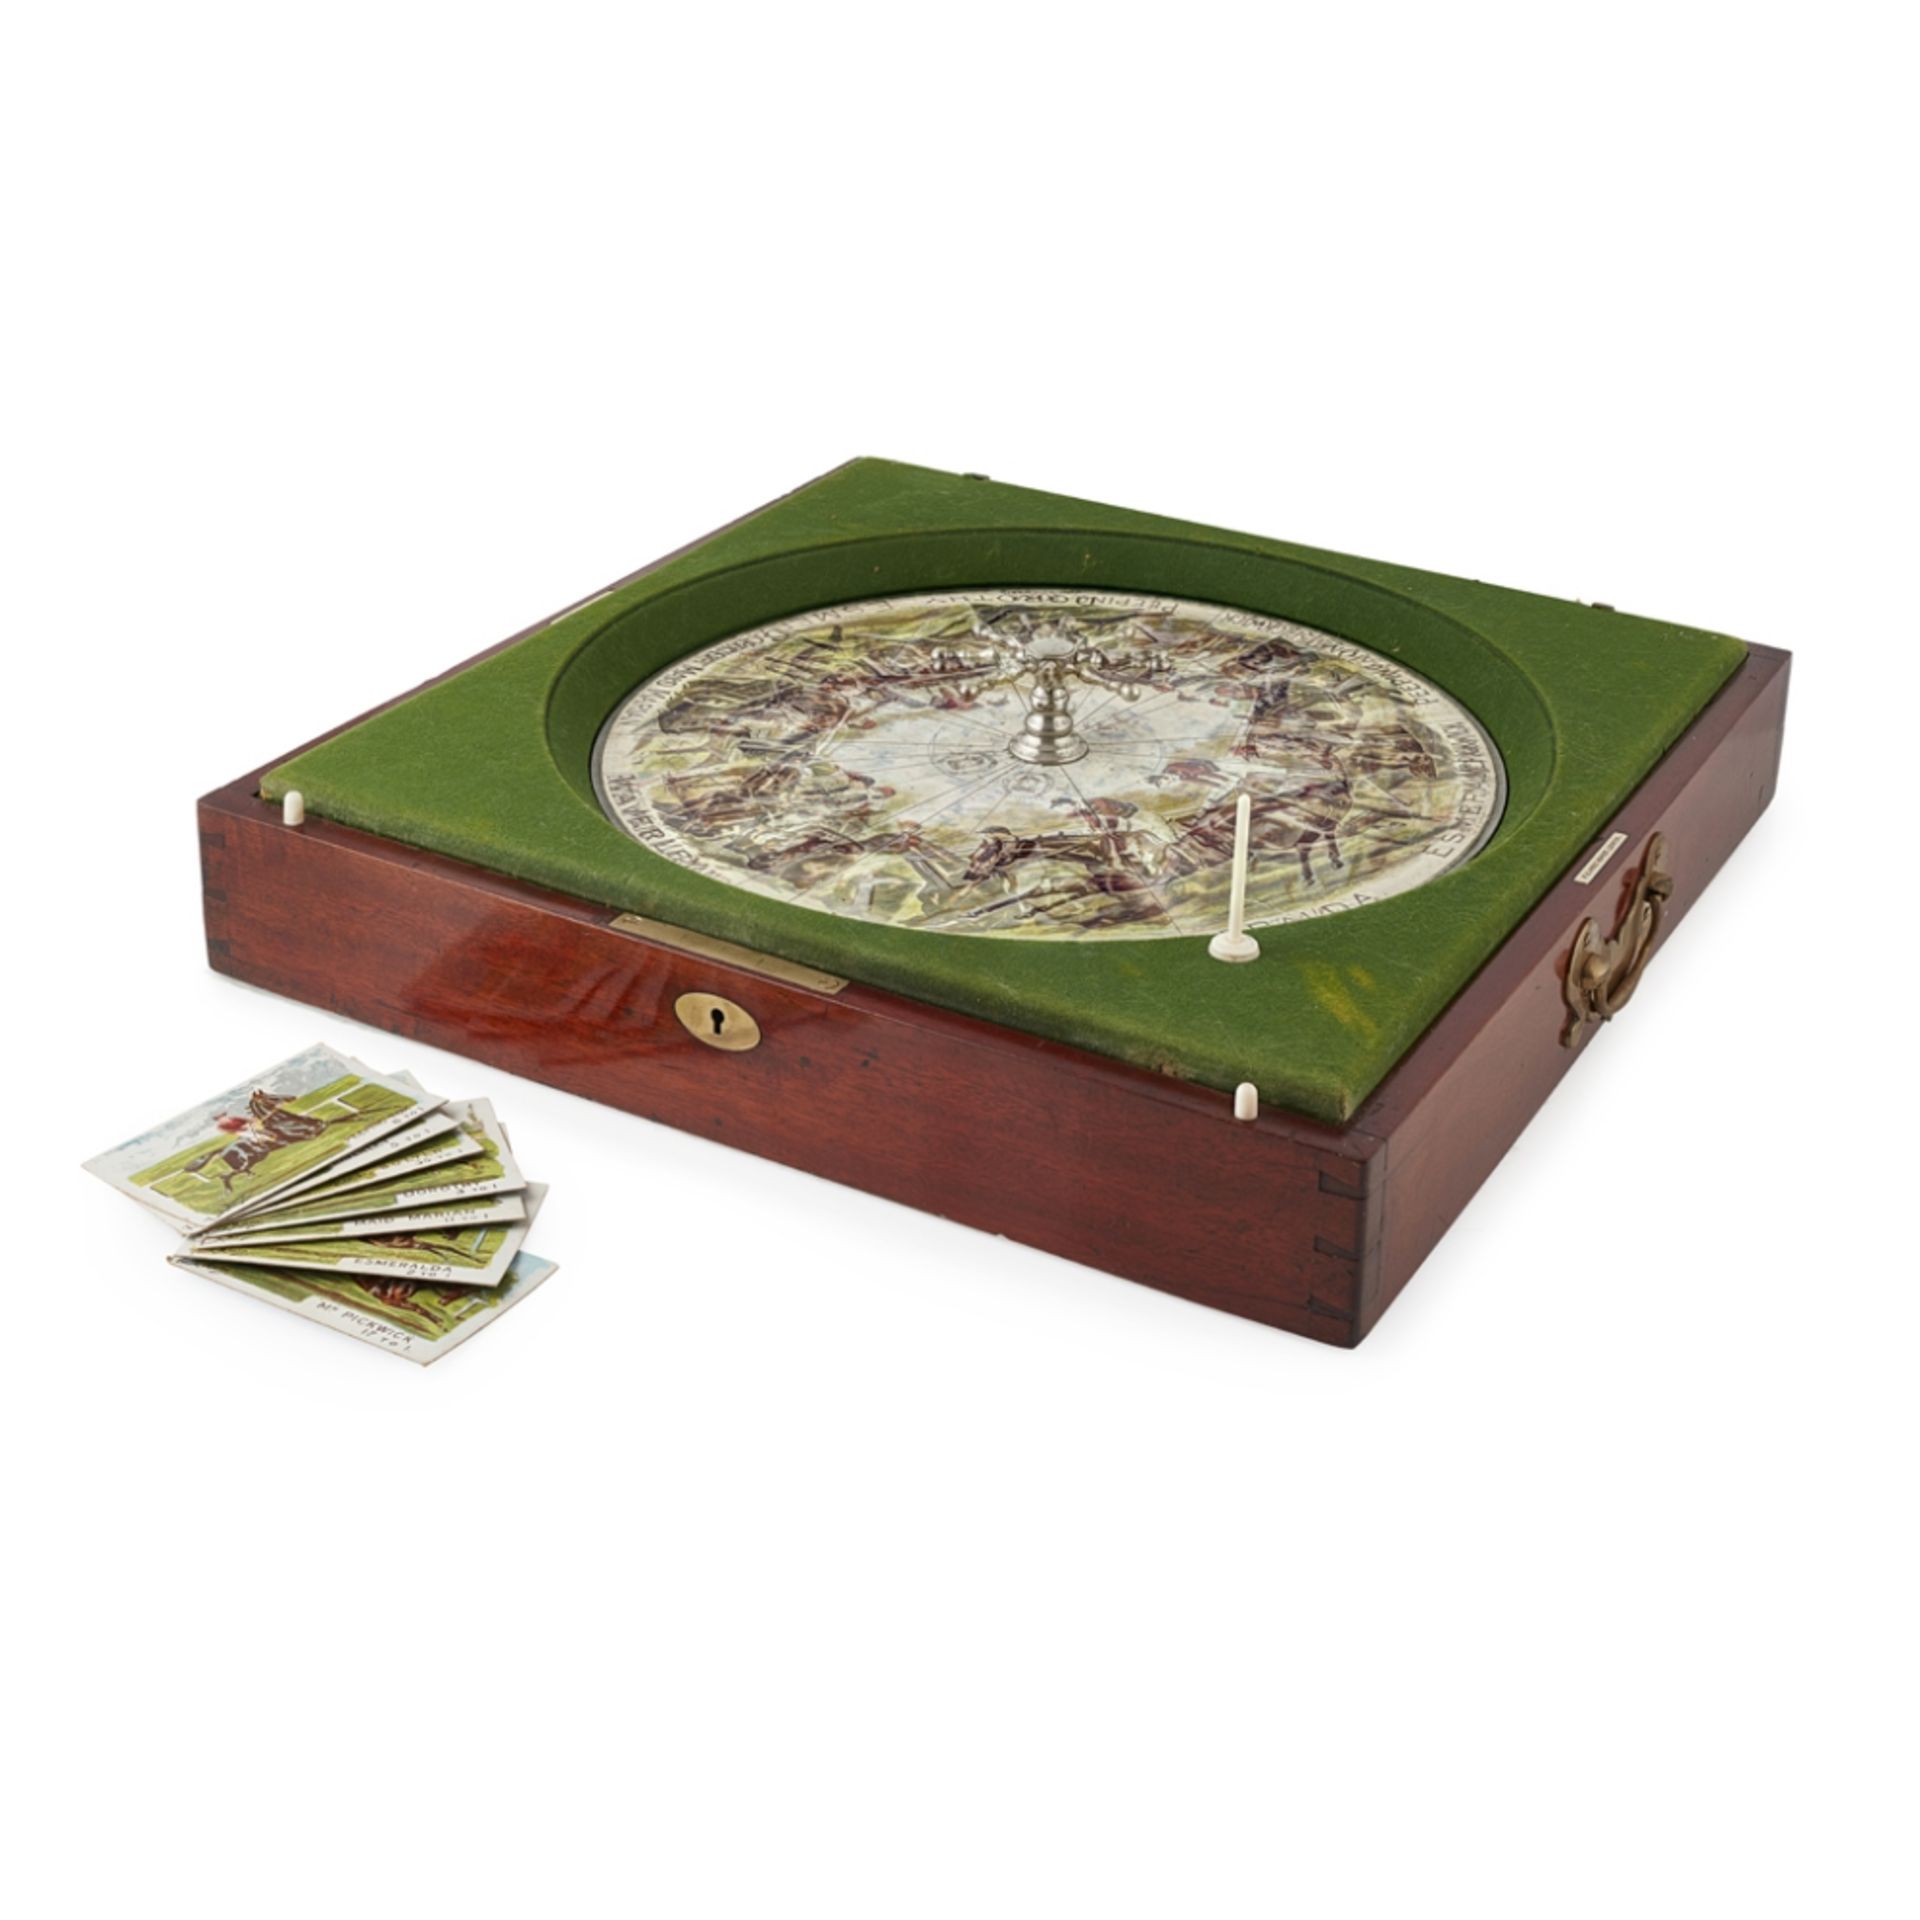 SANDOWN' TABLE-TOP HORSE RACING GAME, BY F. H. AYRES, LONDONEARLY 20TH CENTURY in a mahogany case